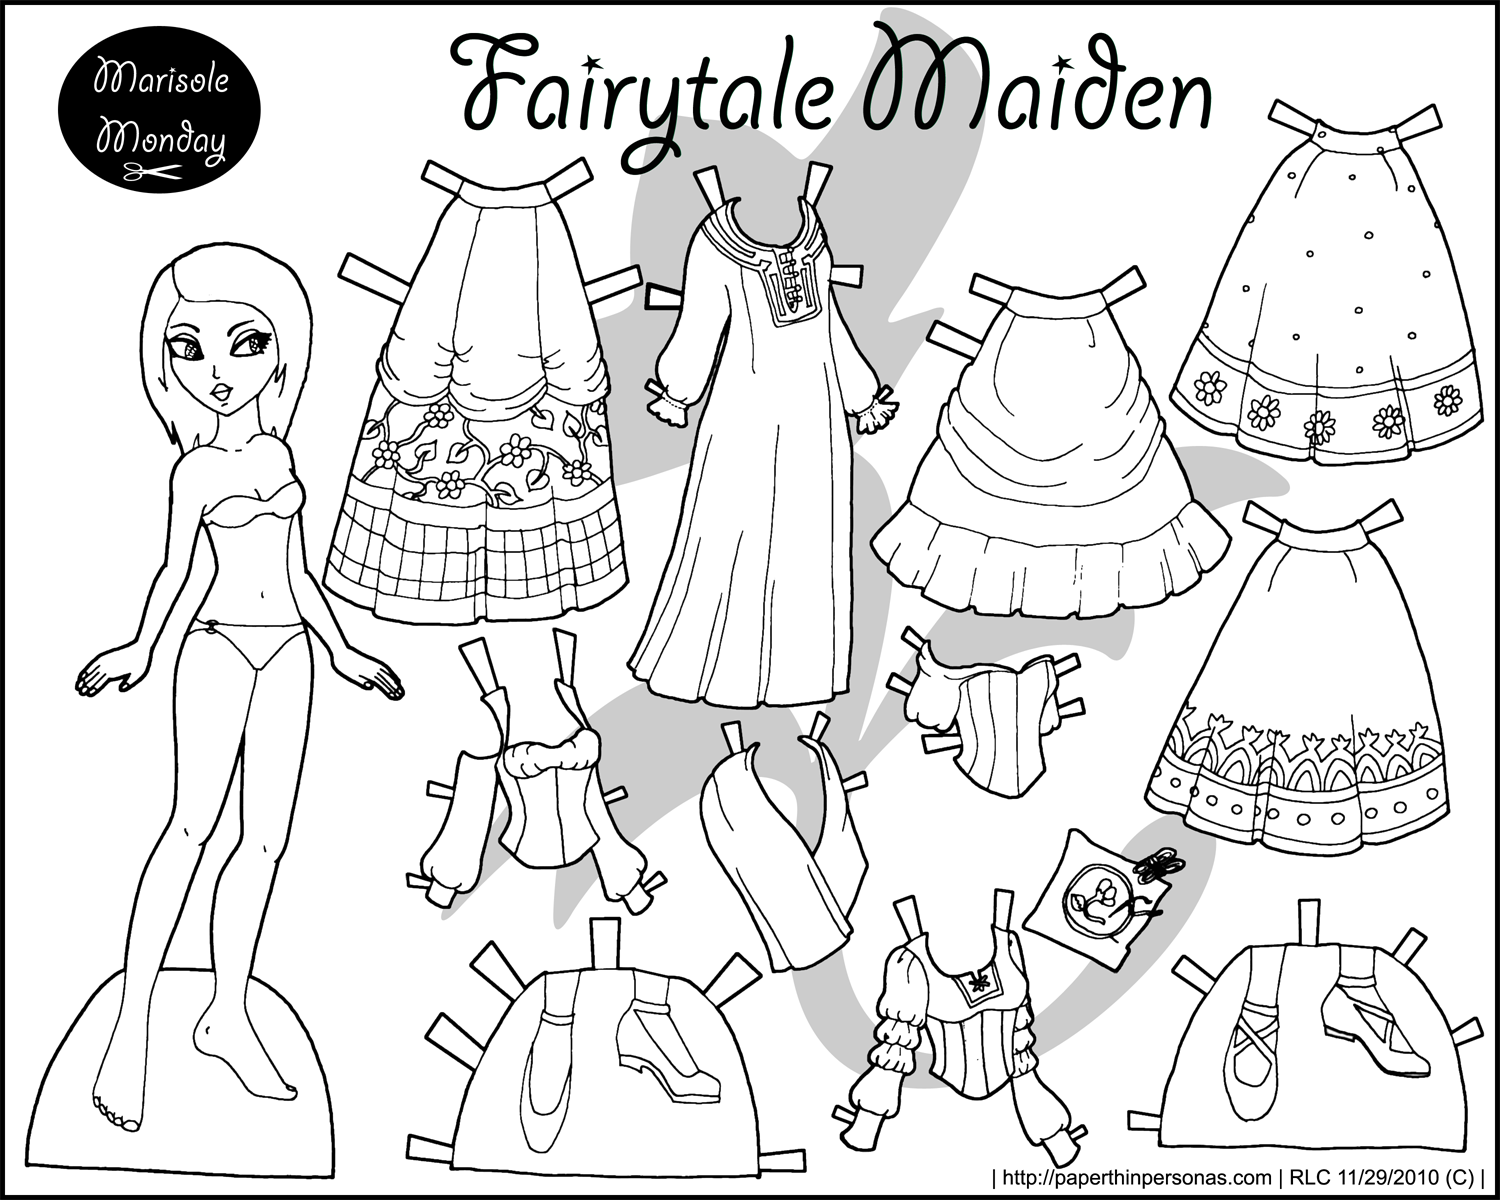 A Fairy Tale maiden black and white princess coloring page to print and dress up